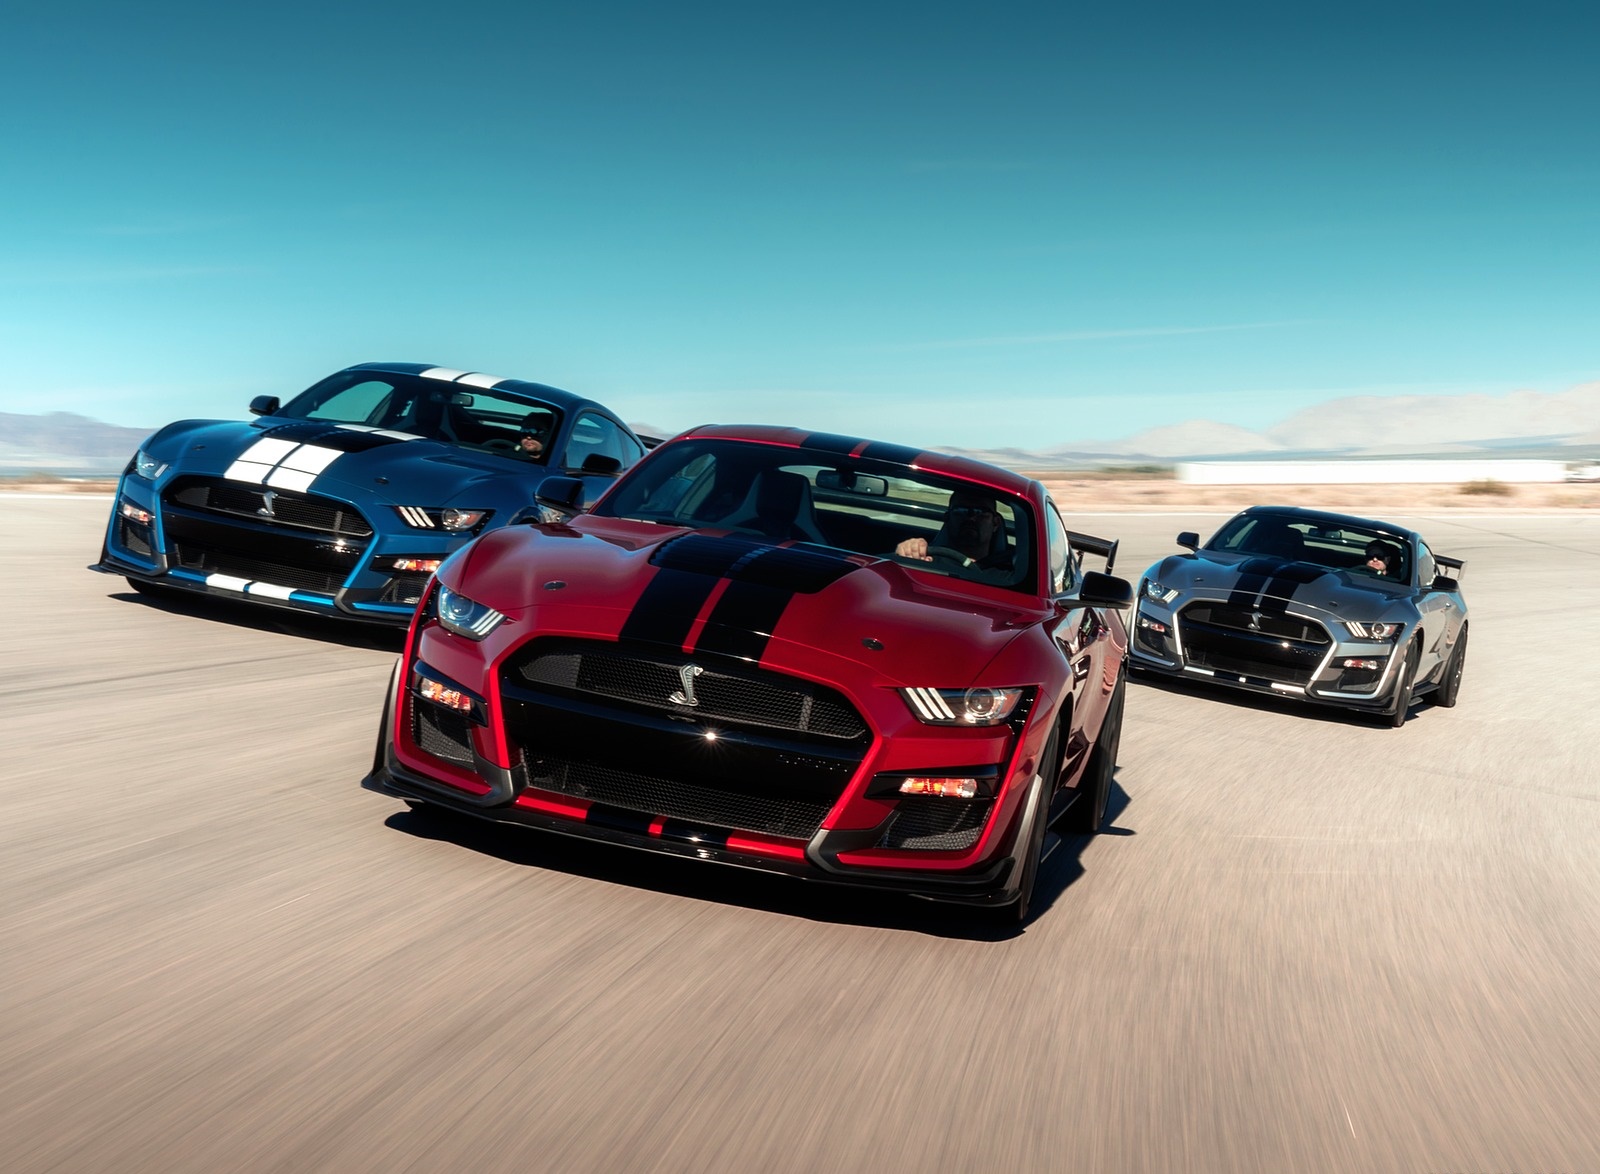 2020 Ford Mustang Shelby GT500 Wallpapers (115+ HD Images) - NewCarCars